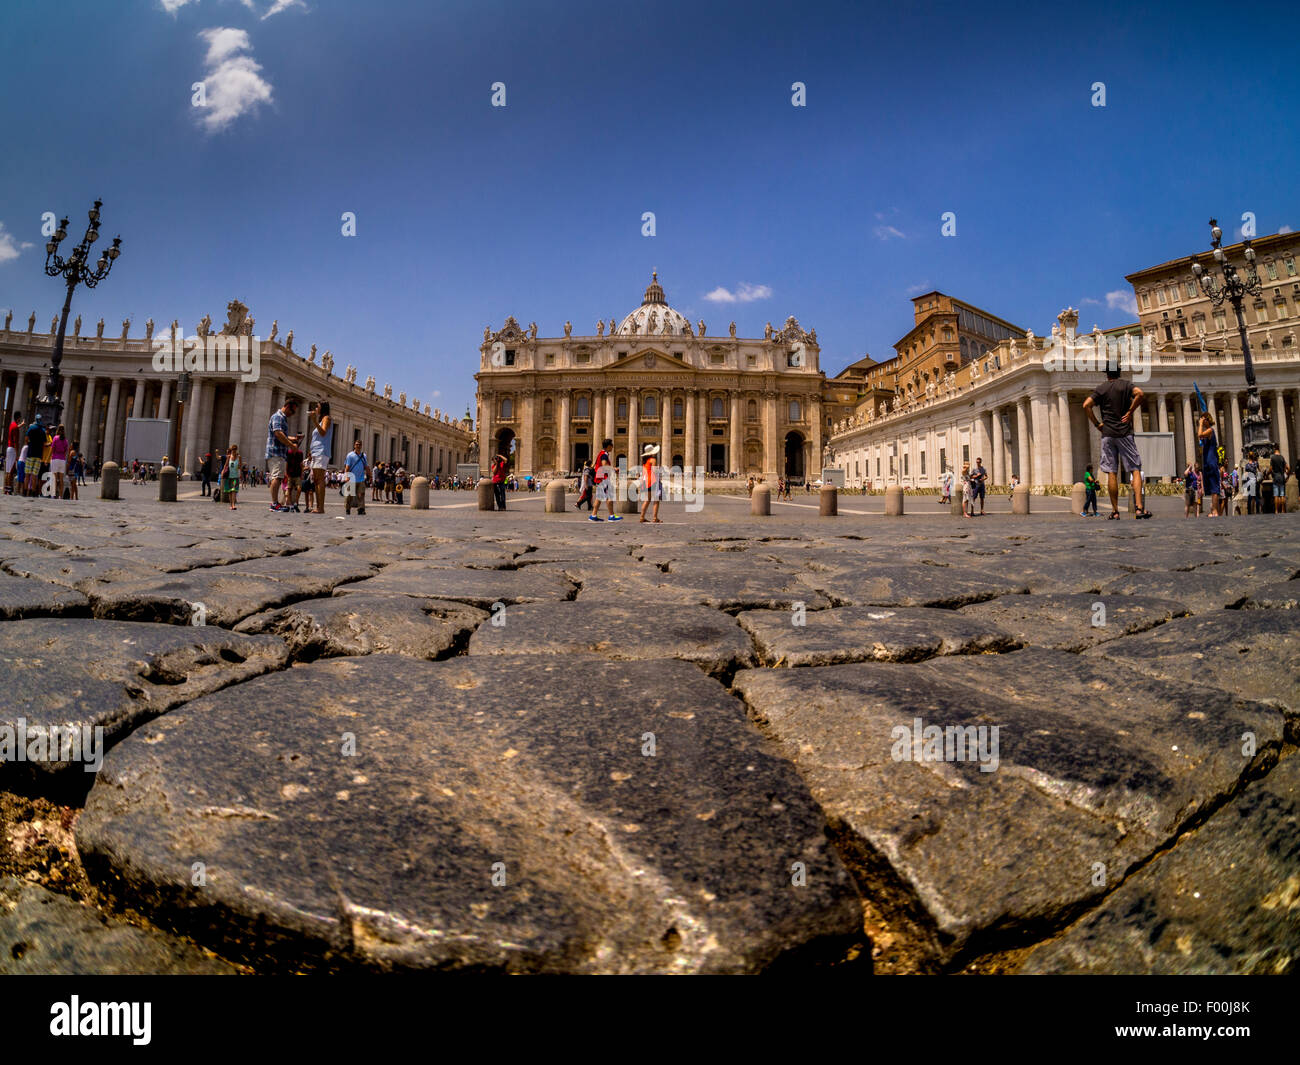 Fisheye lens shot of St. Peter's Basilica taken from a low angle to include St. Peter's Square, Vatican City, Rome. Italy. Stock Photo